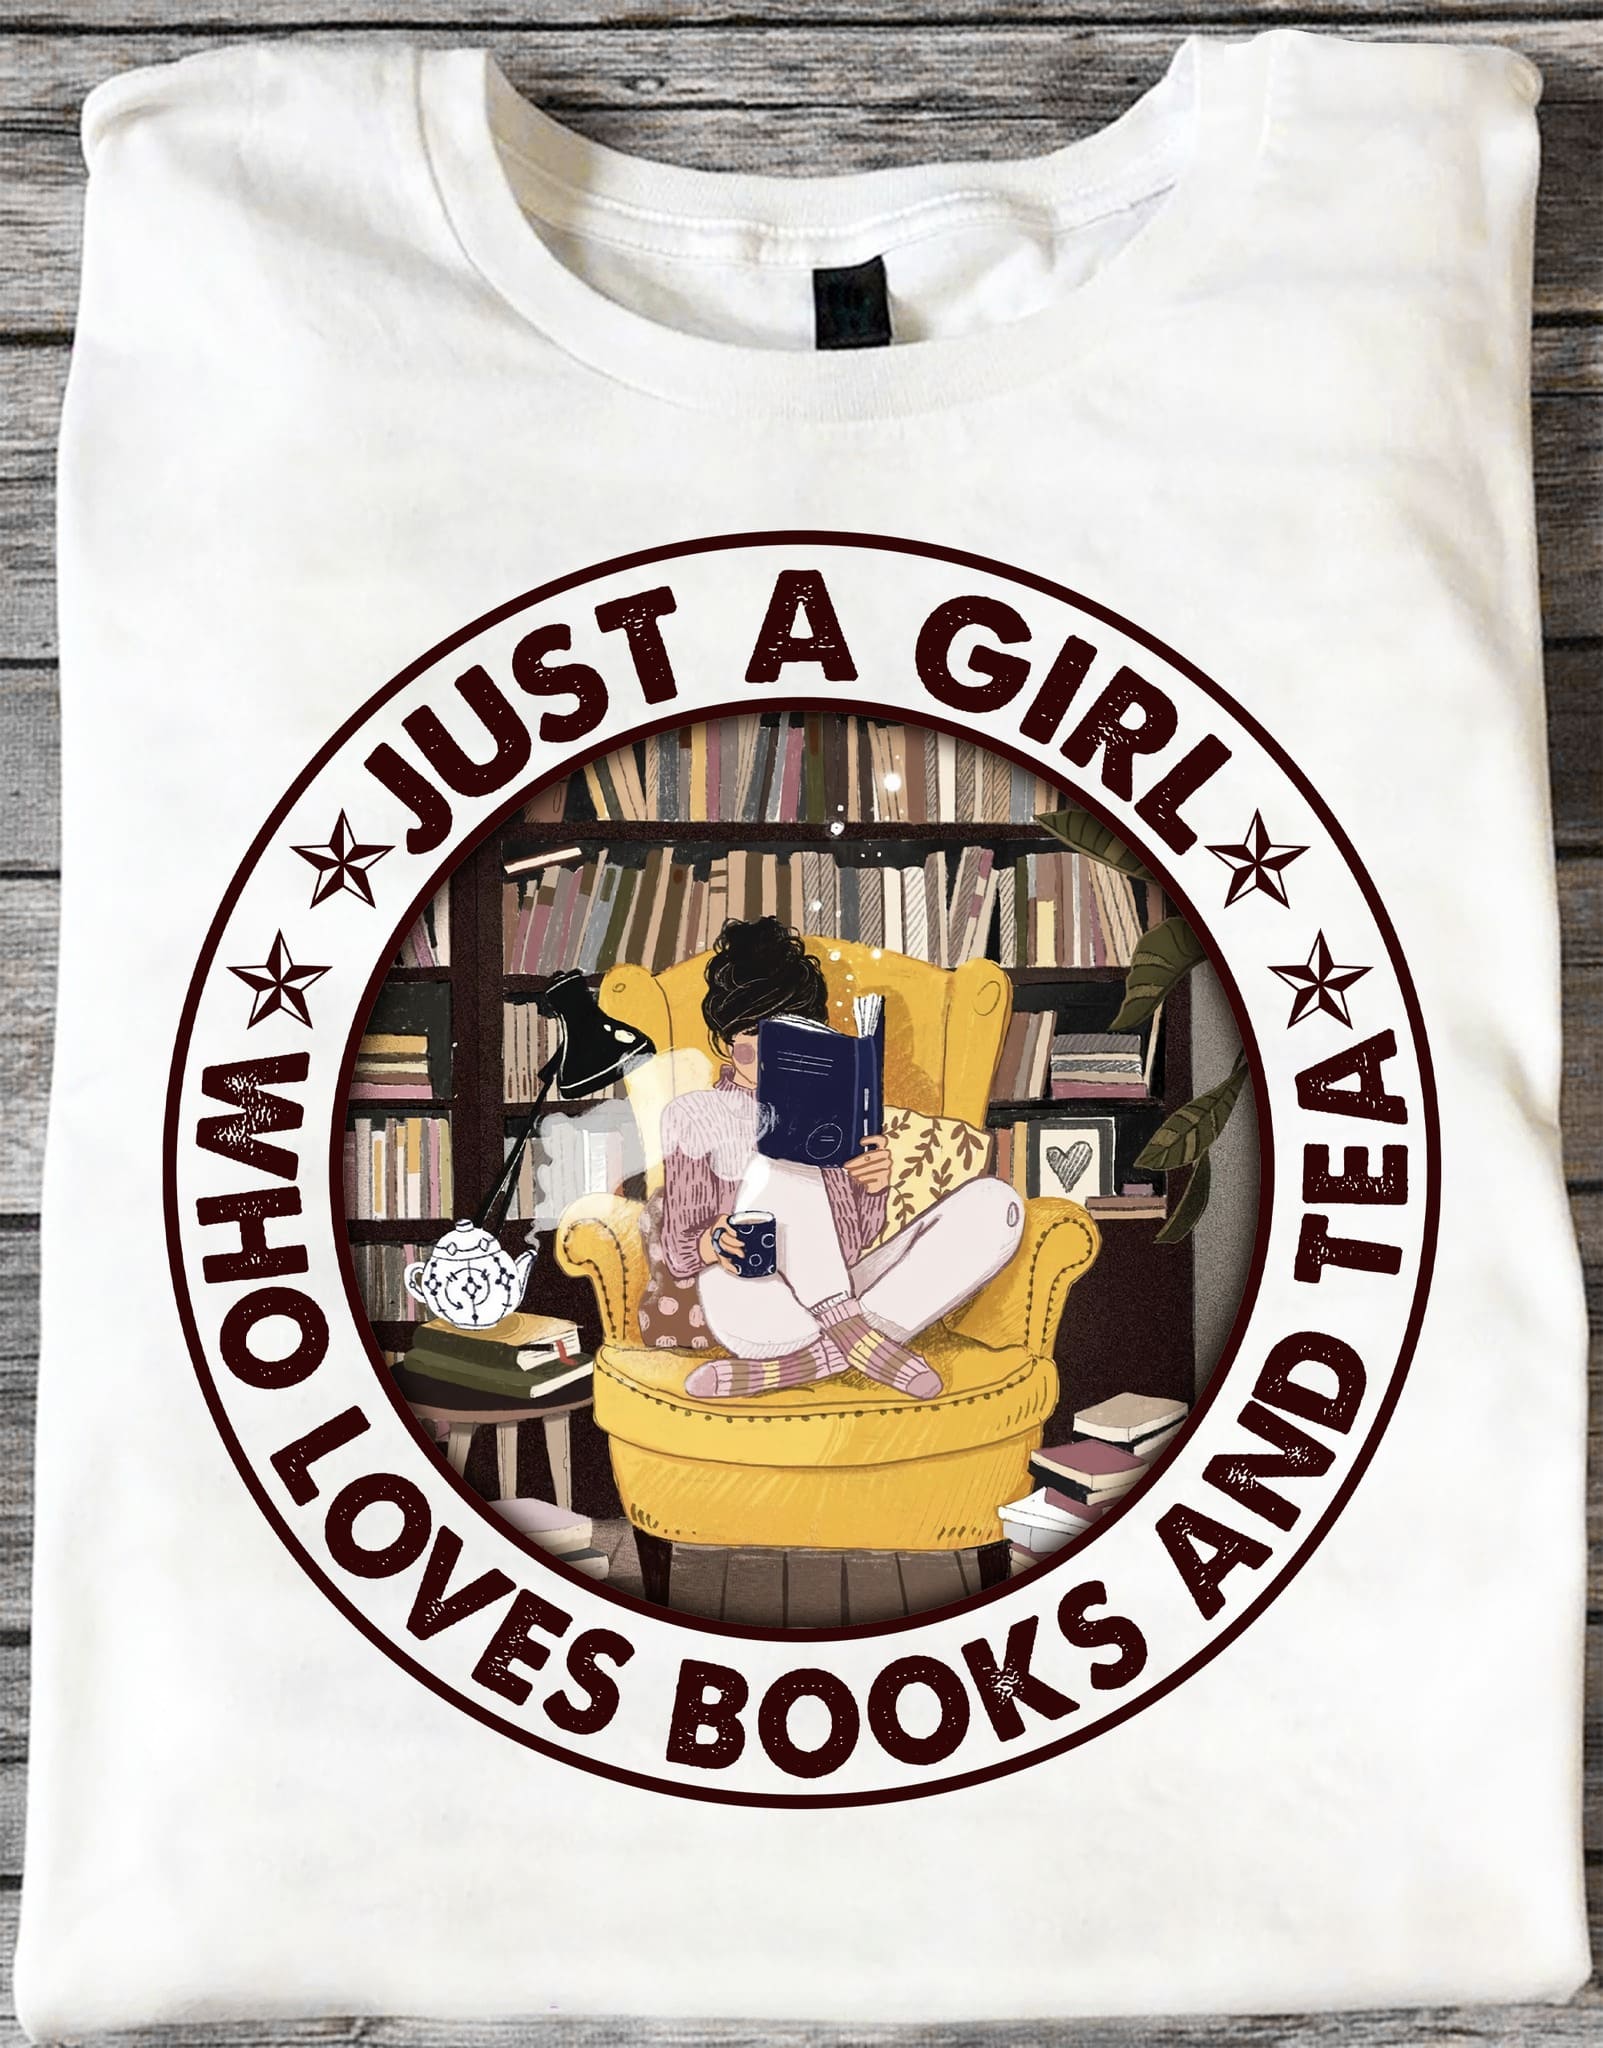 Just a girl who loves books and tea - Girl reading book, gift for book girl